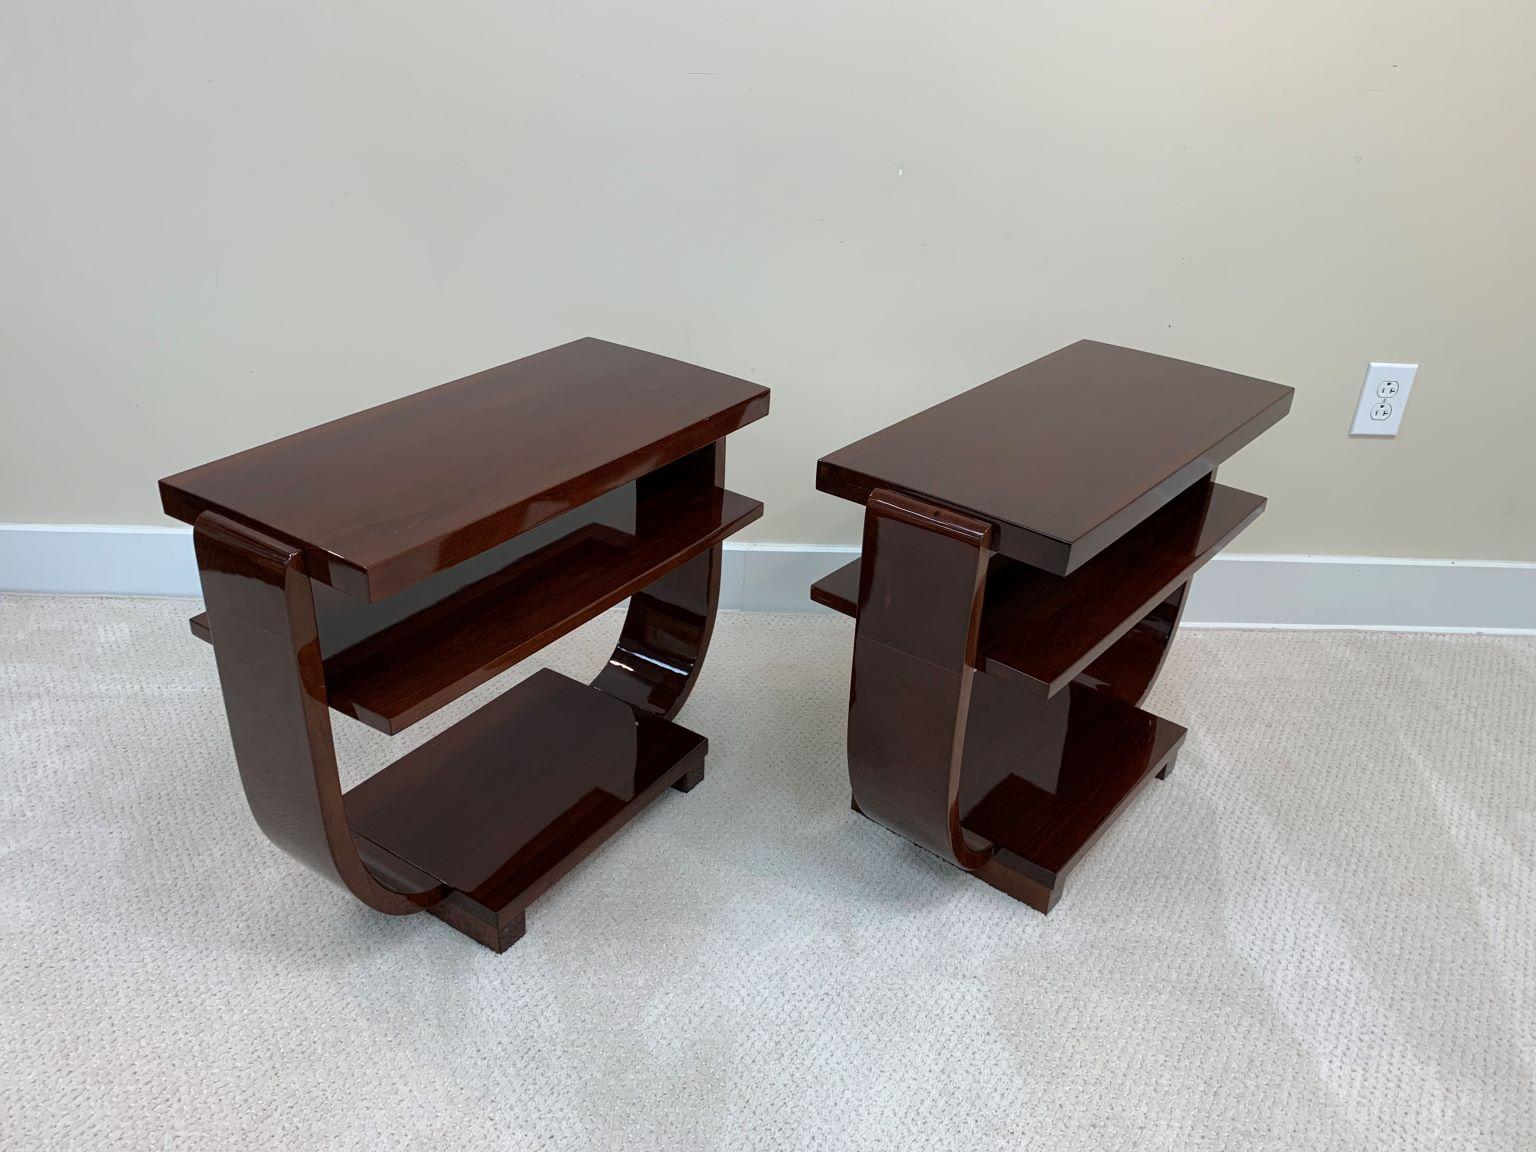 Stained Art Deco Machine Age End Tables by Modernage Furniture Company, Circa 1930's